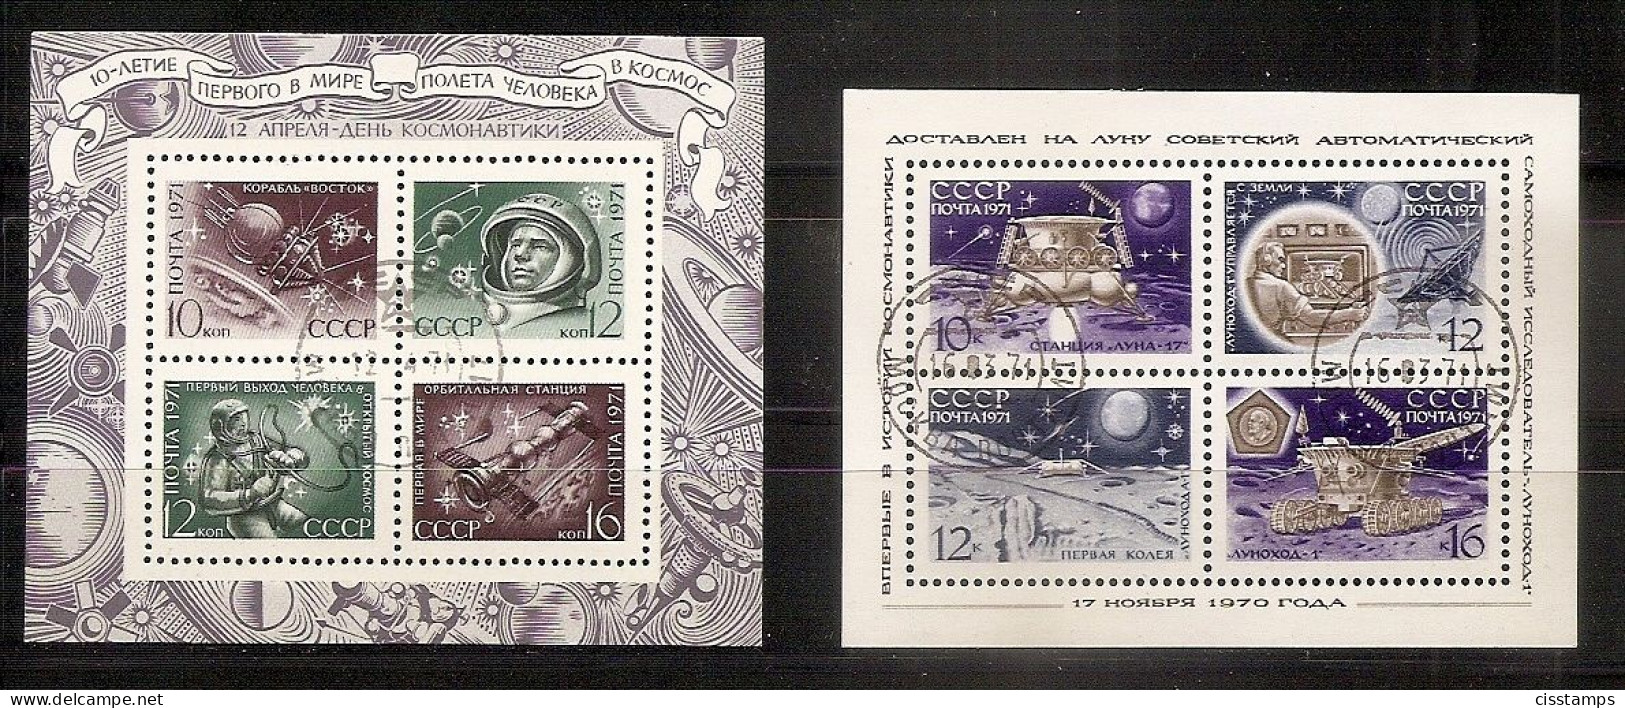 RUSSIA USSR 1971●Collection Of Cancelled Stamps&S/sheets●Mi 3843-3882, Bl.68,69 CTO - Sammlungen (ohne Album)